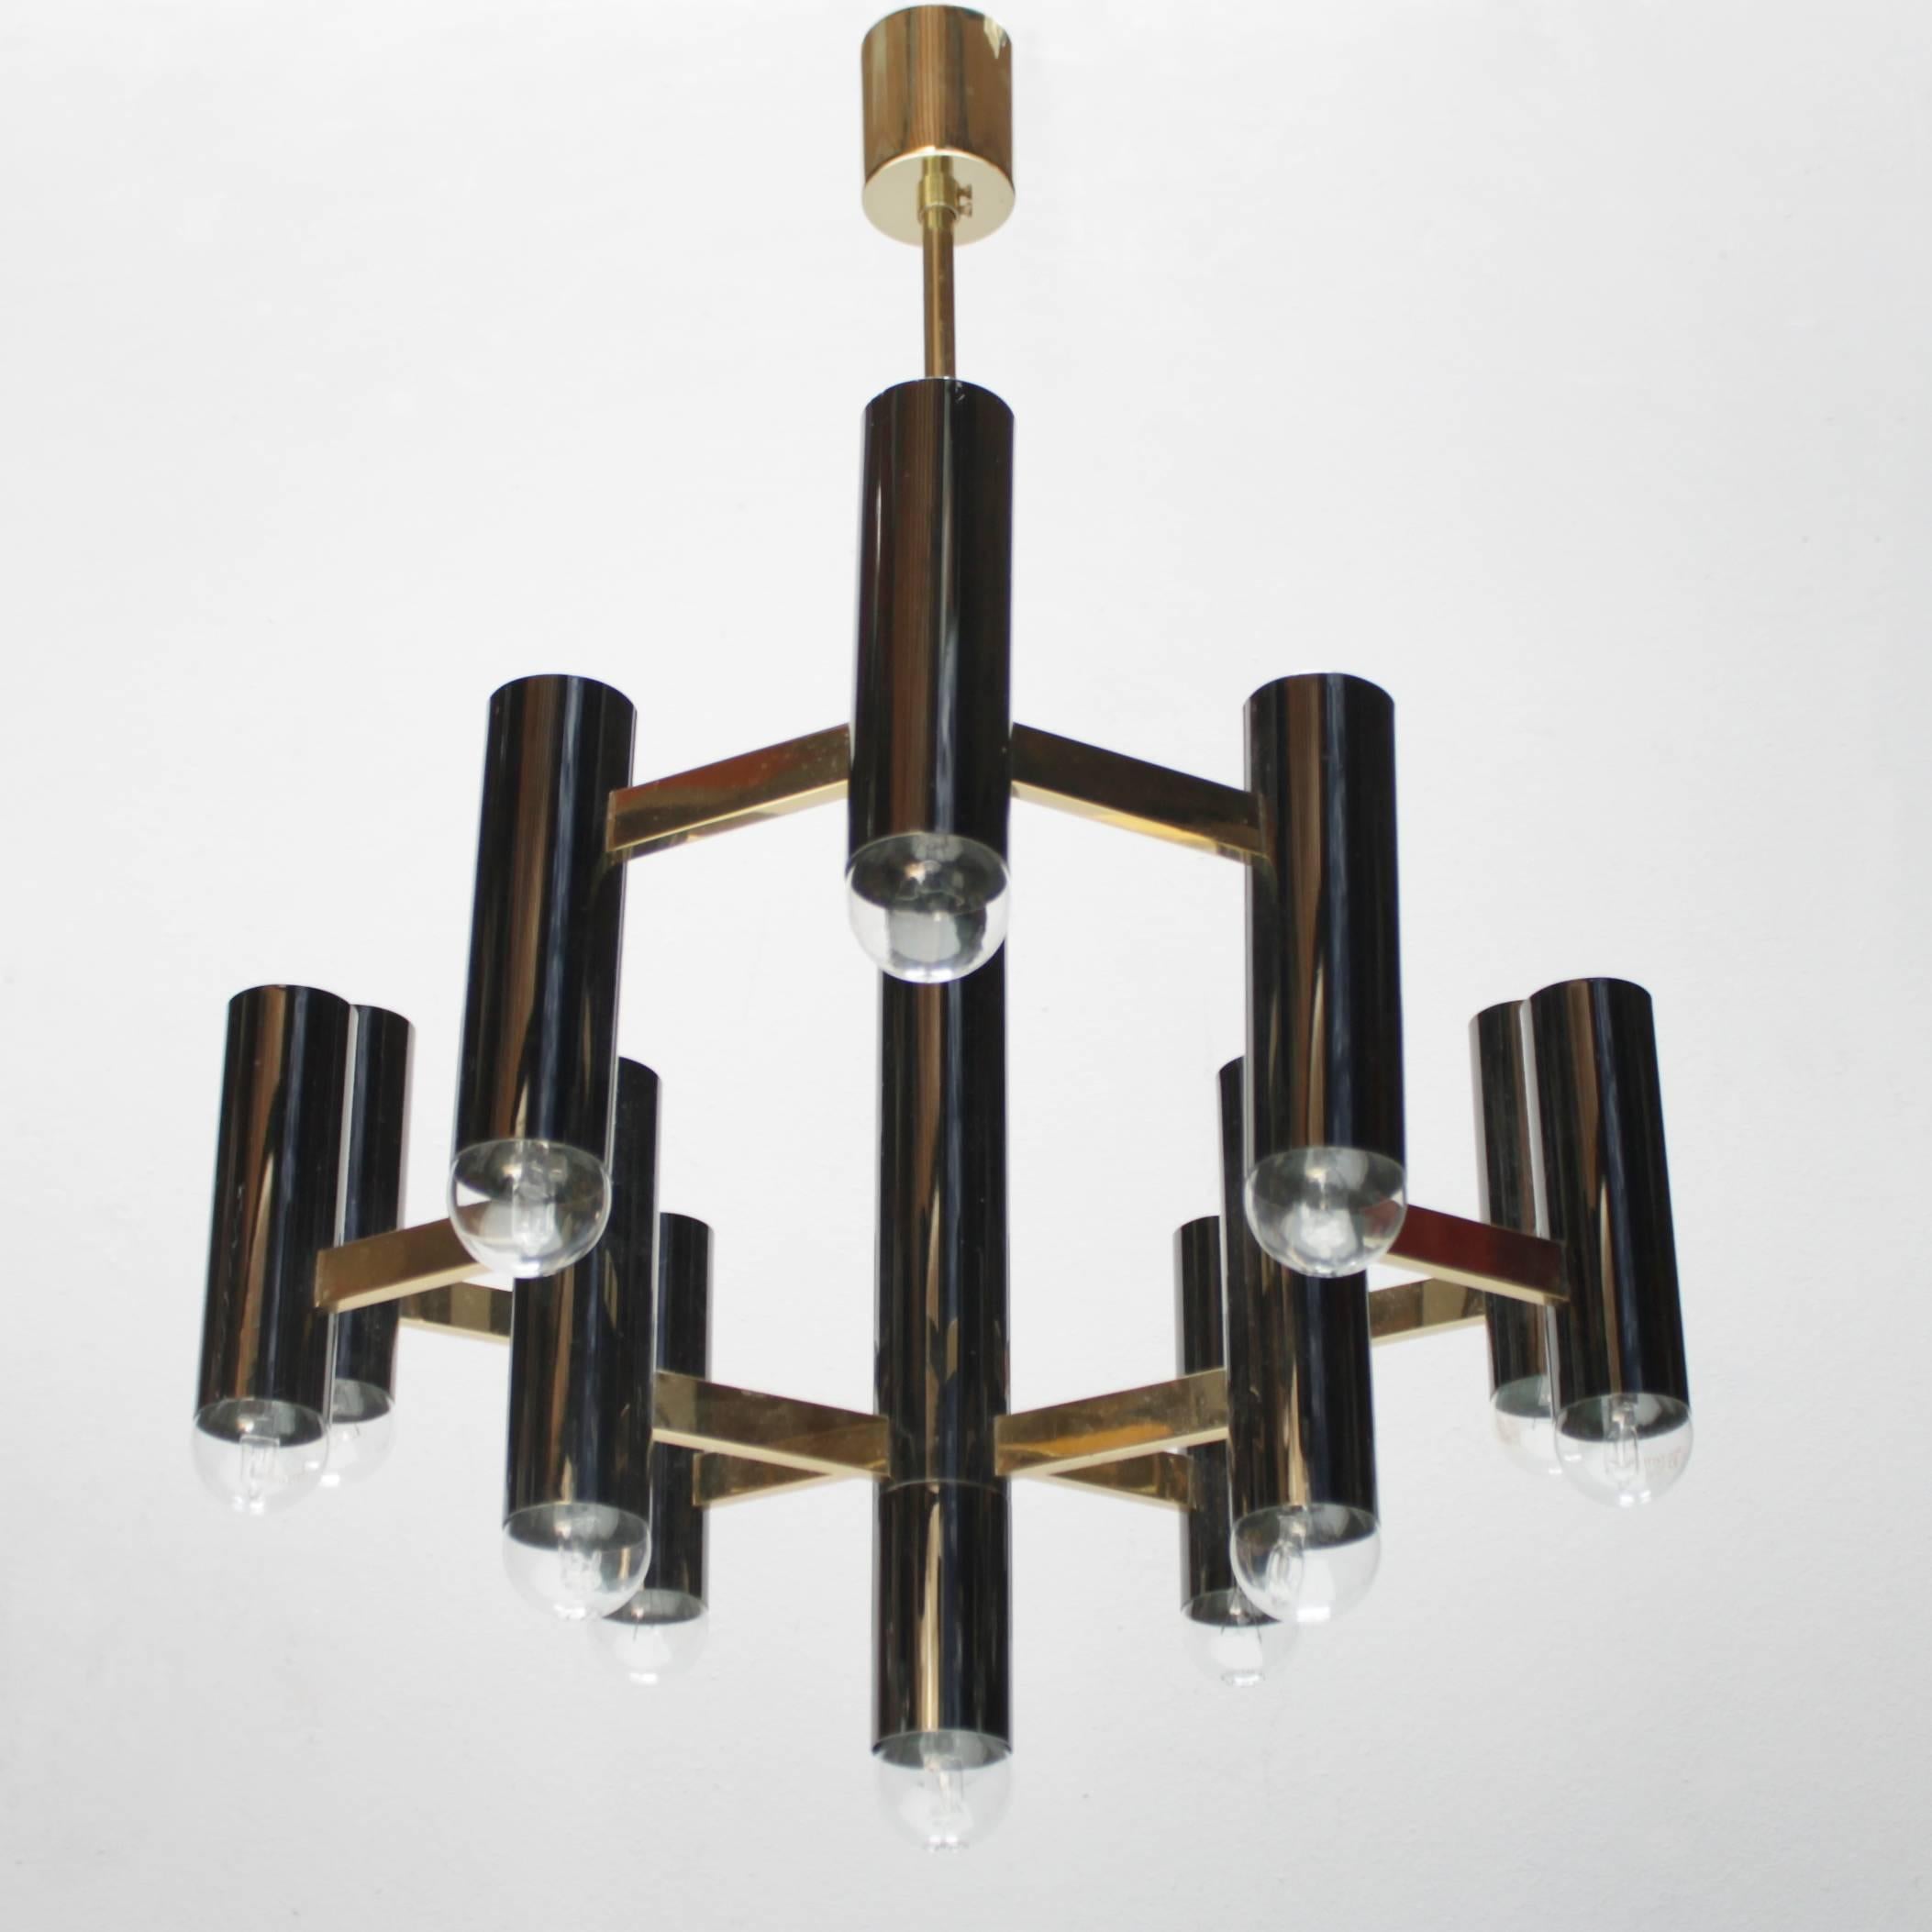 Pair of rare black and brass chandeliers with each 13 light bulbs. Design by Gaetano Sciolari for S.A. Boulanger Belgium. Marked. Diameter 20.9 in. (53 cm). They have a different height, the height is 24.4 in. (62 cm) from ceiling till drop and the